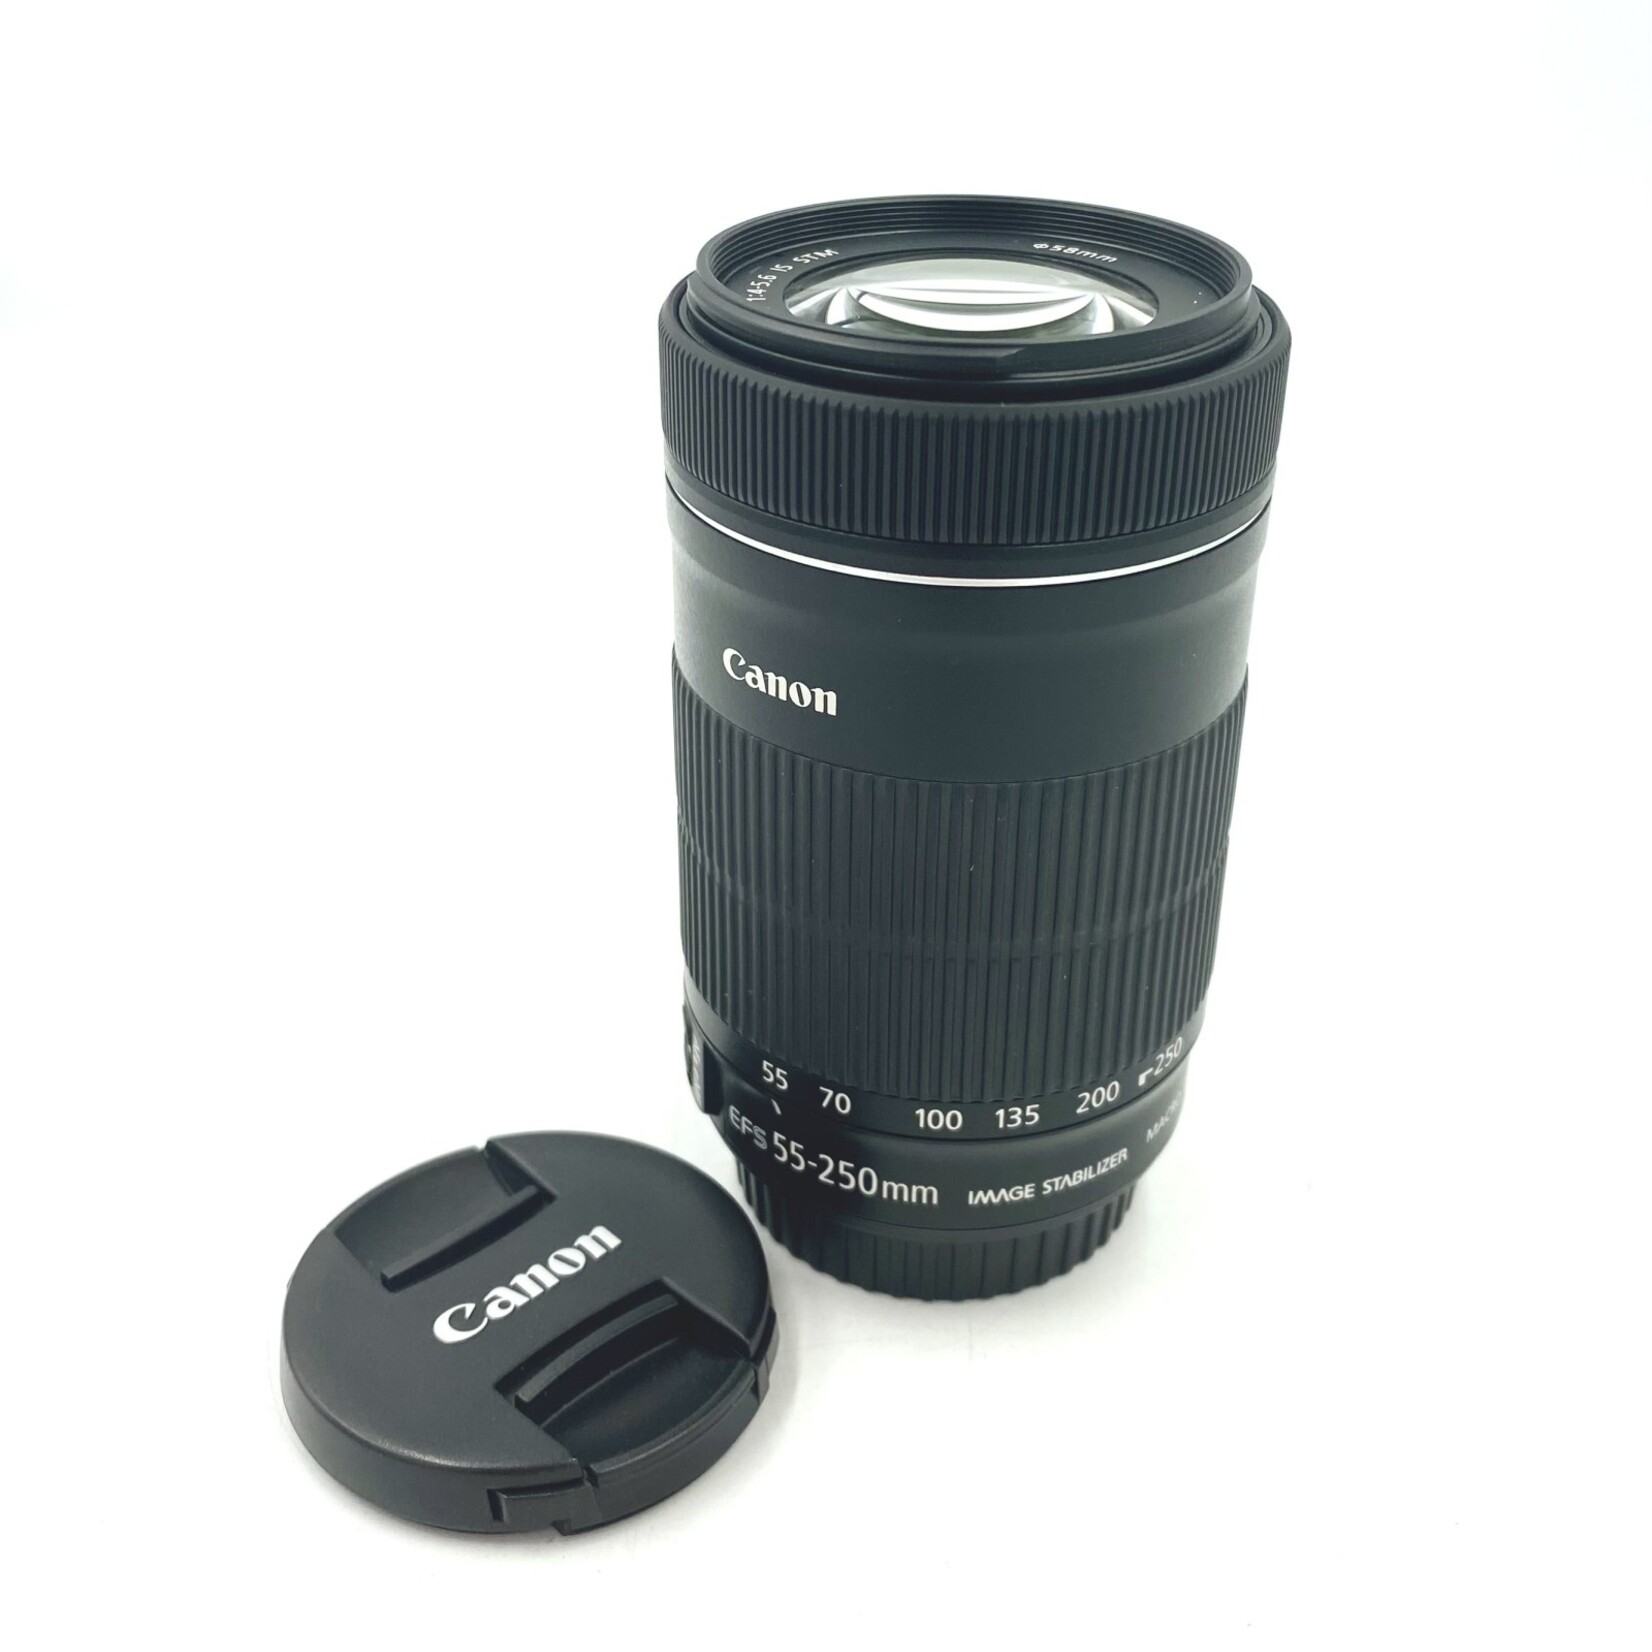 USED Canon EF-S 55-250mm f/4-5.6 IS STM lens - Stewarts Photo